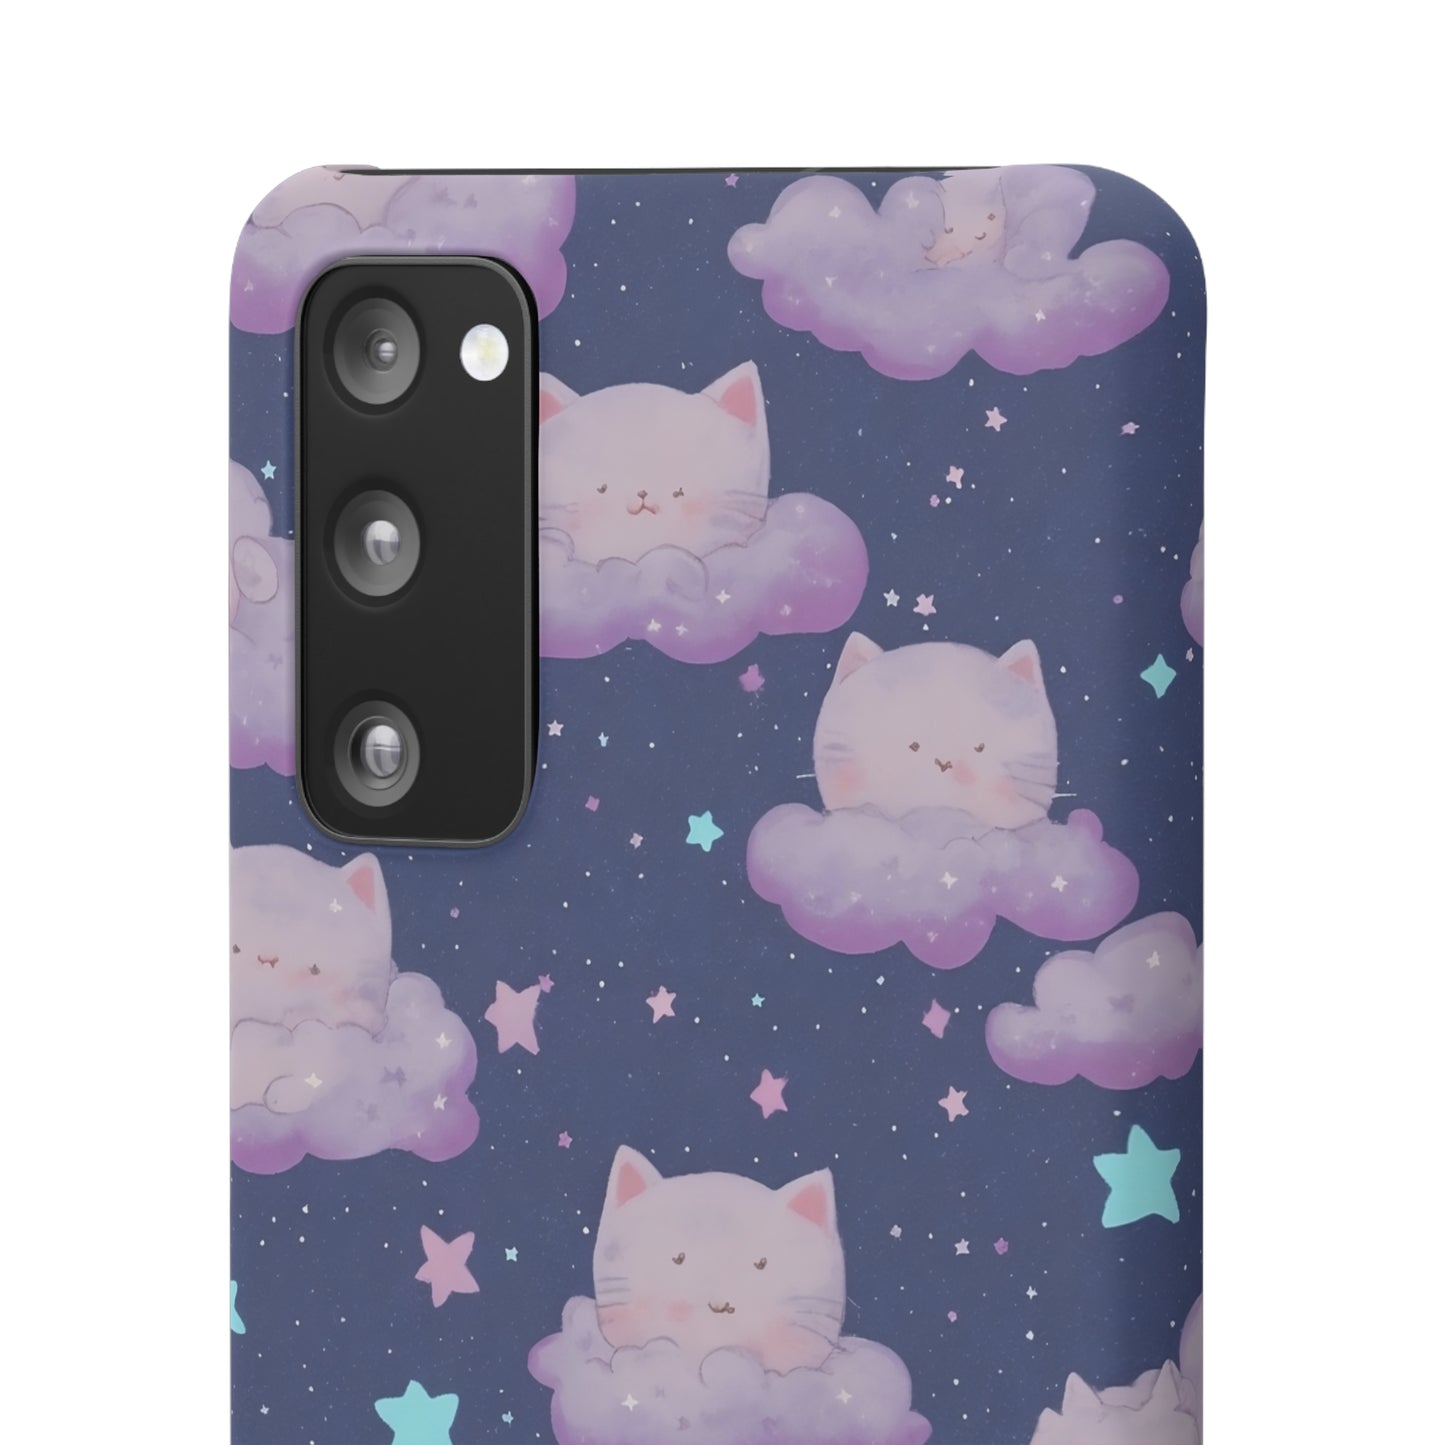 "Purrfect Paradise Sky" Samsung Snap Cases